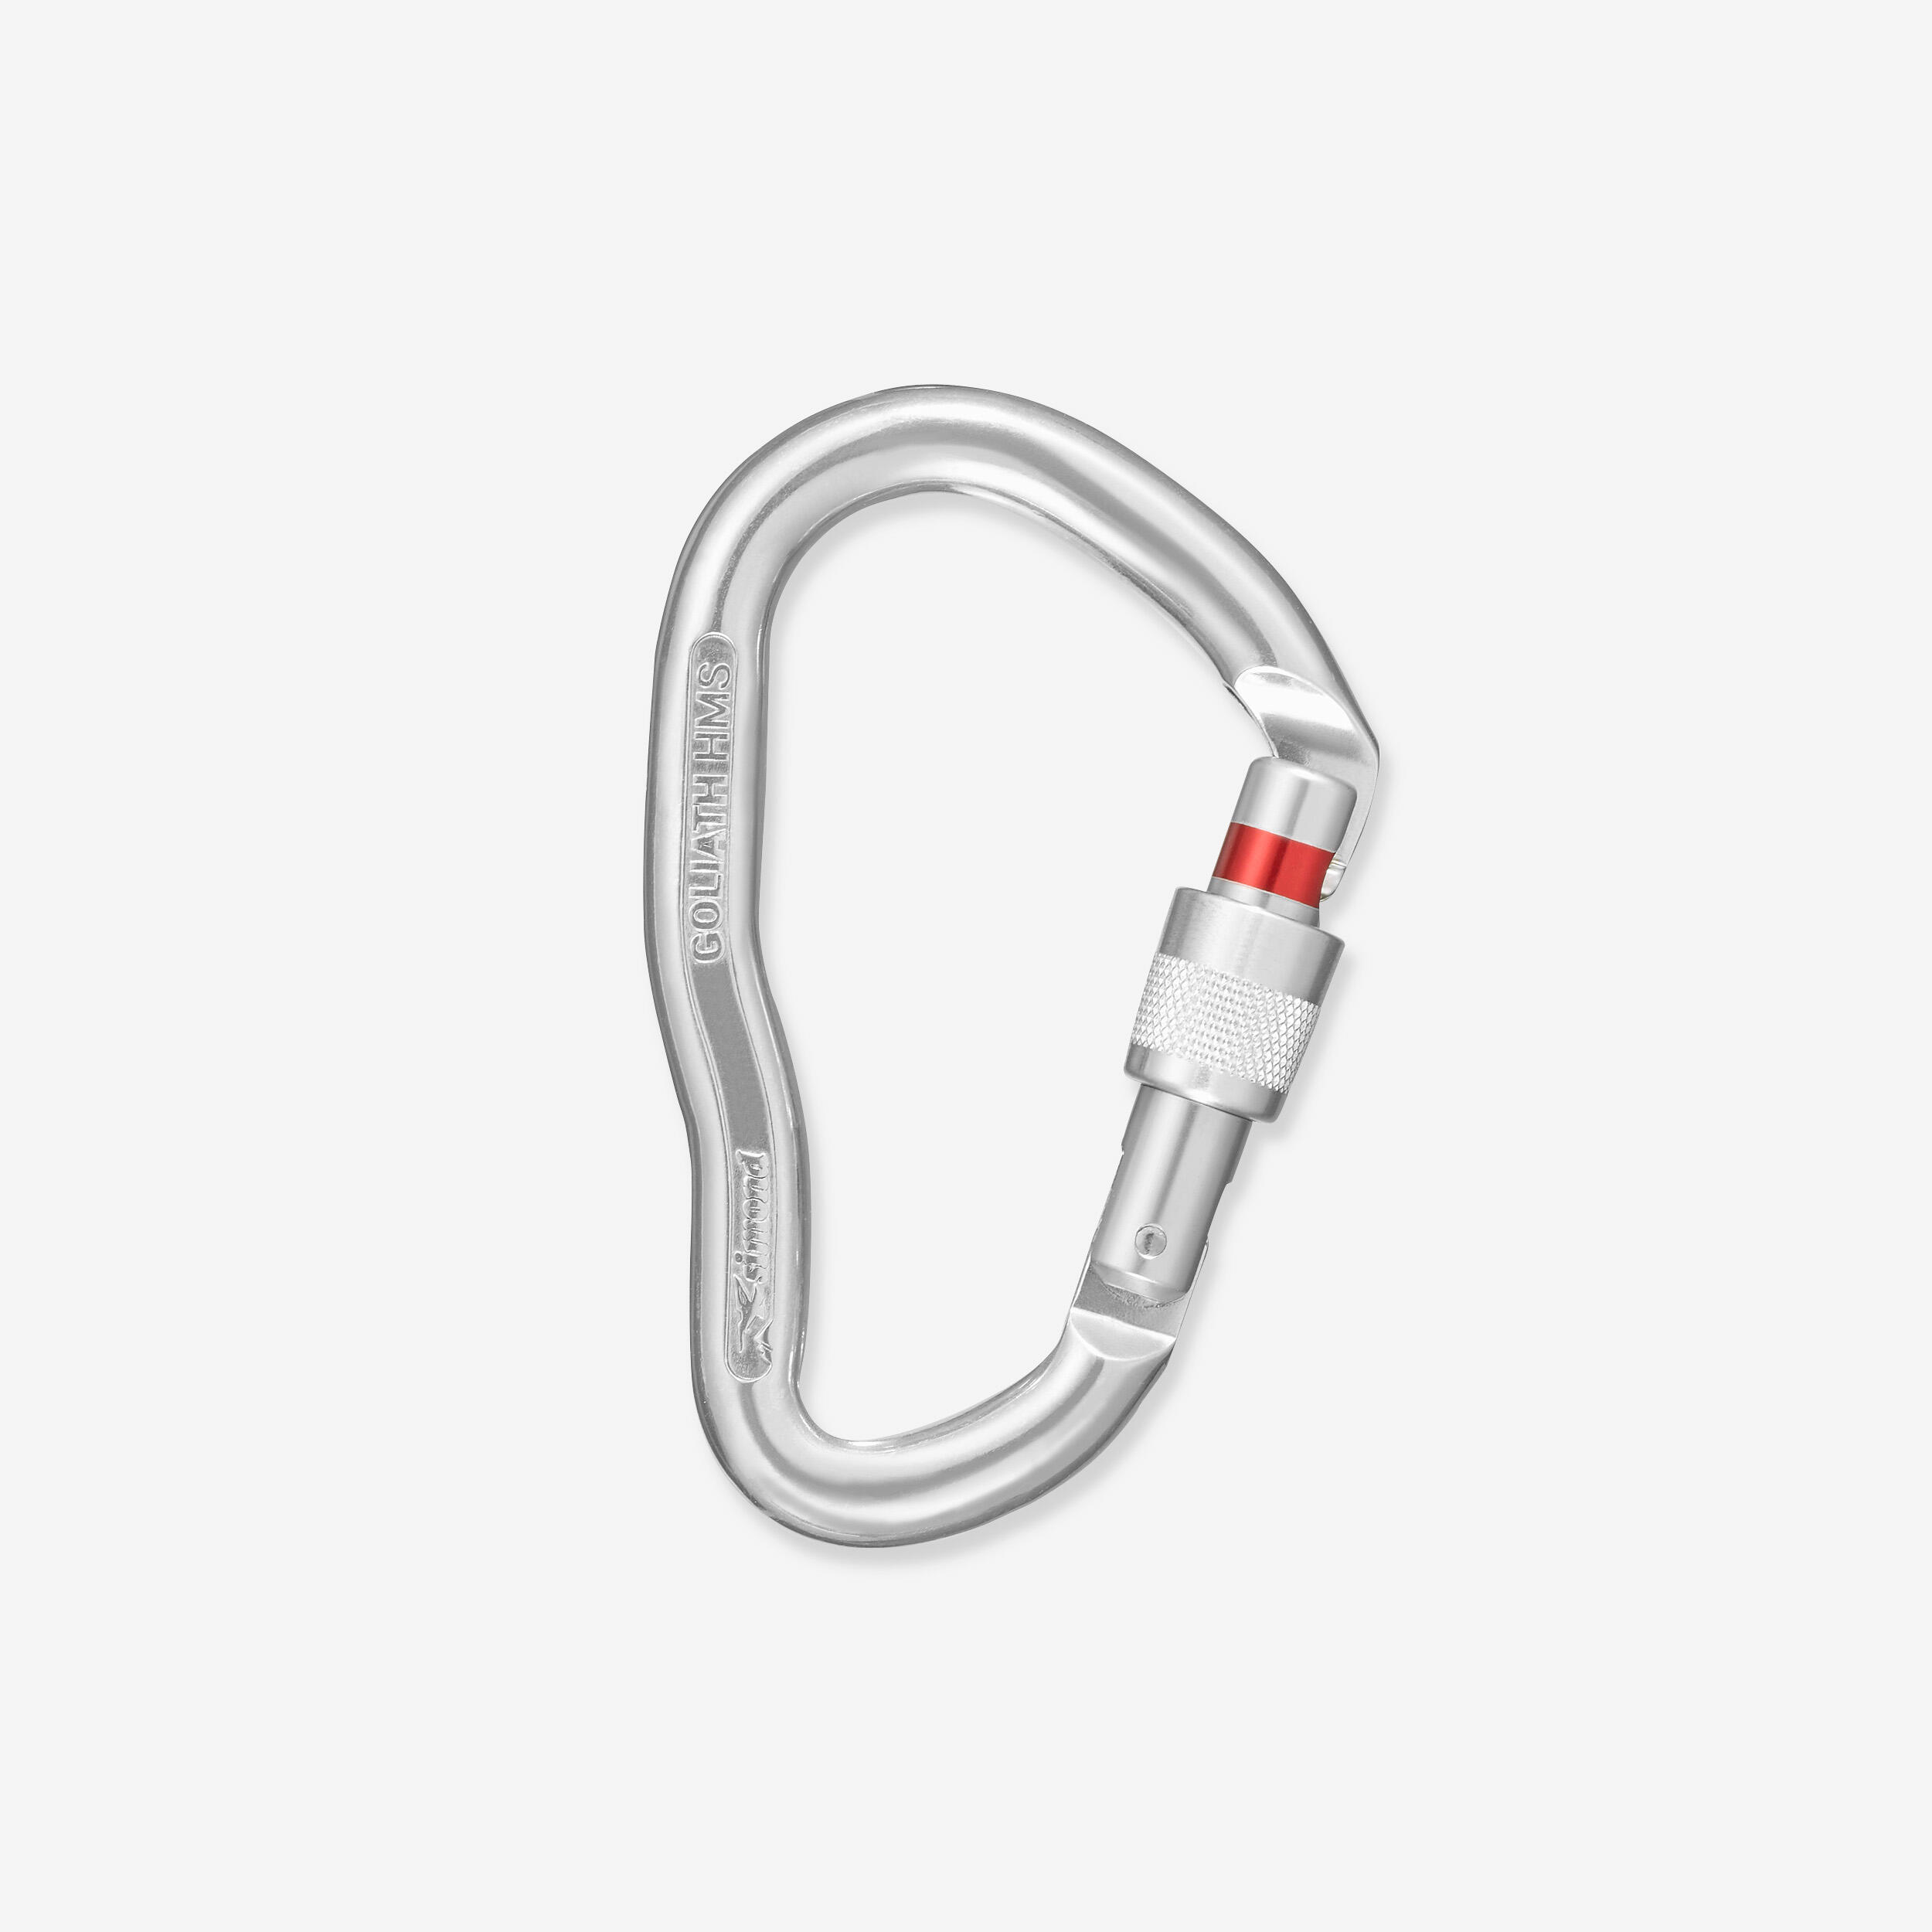 HMS MOUNTAINEERING AND CLIMBING SCREWGATE CARABINER - GOLIATH